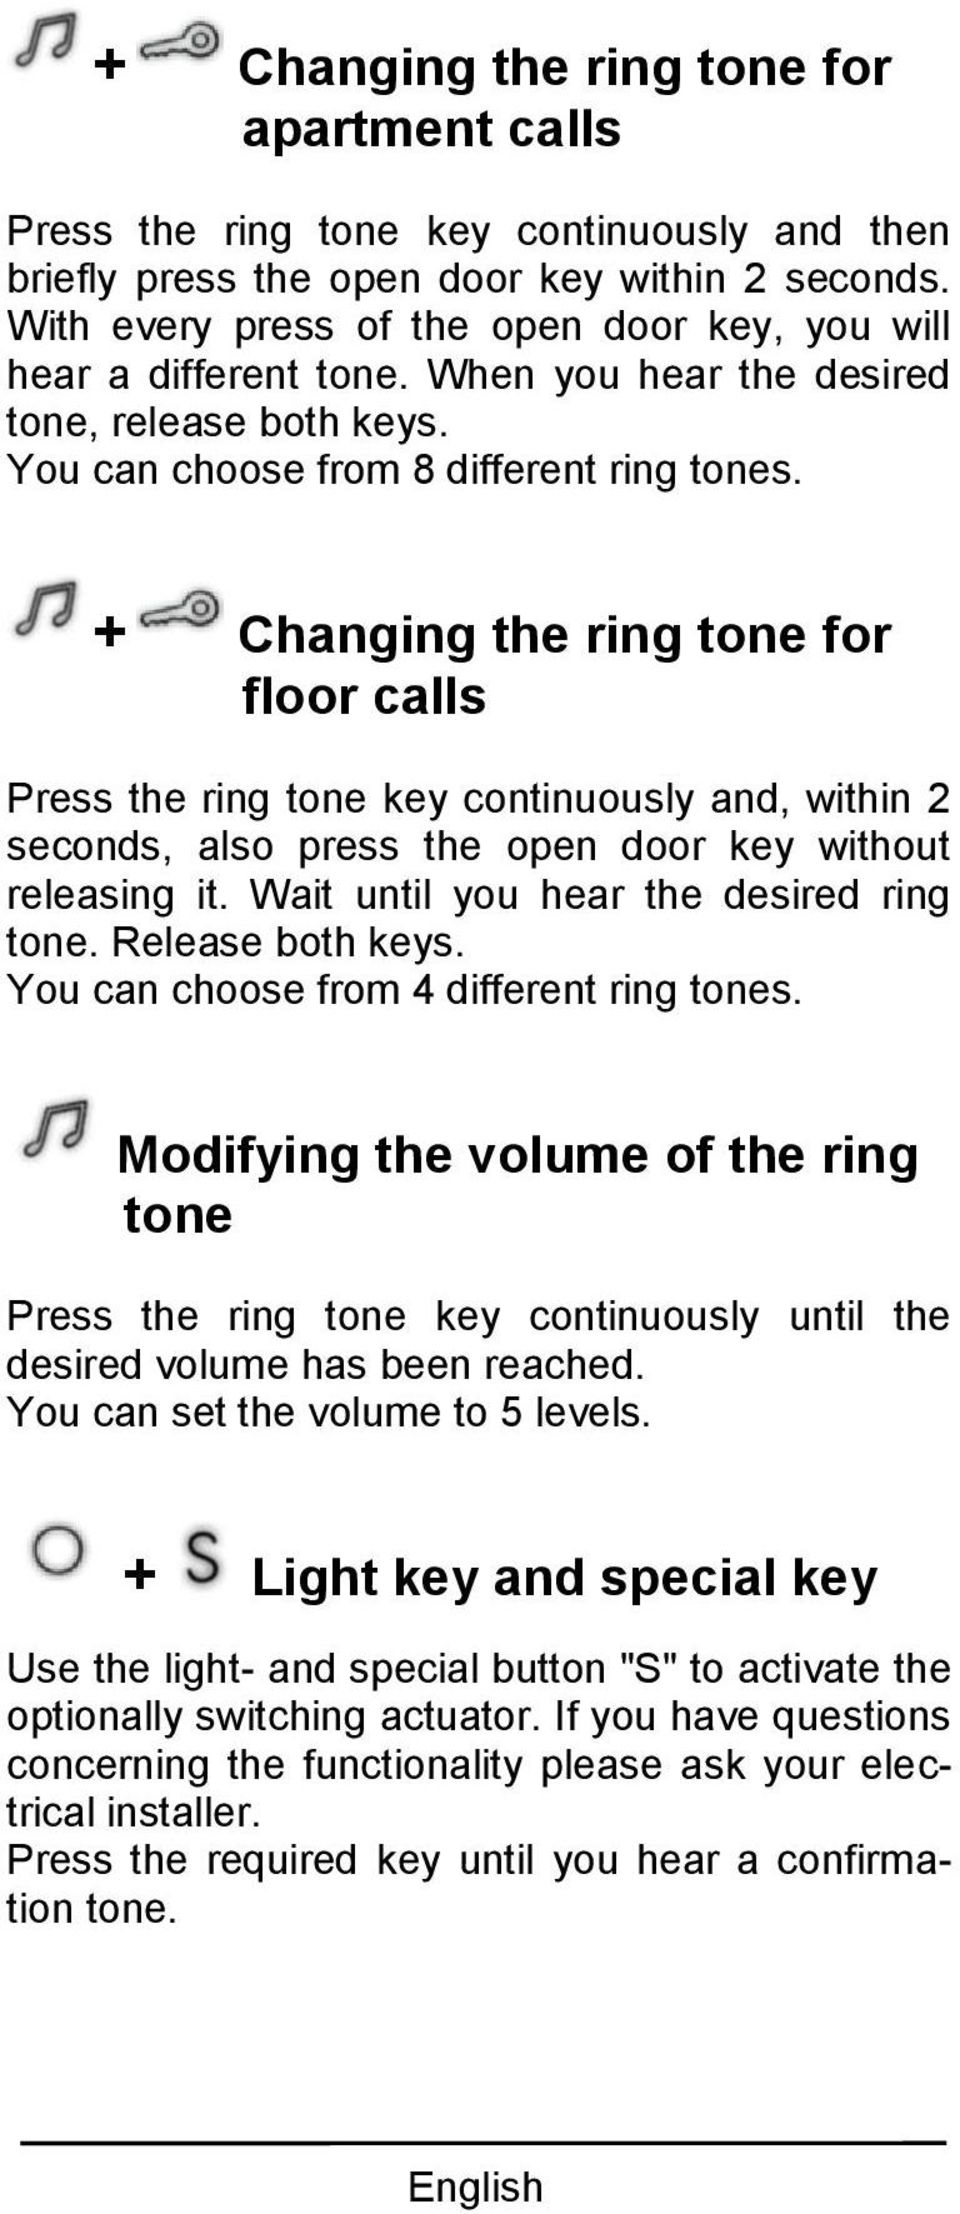 + Changing the ring tone for floor calls Press the ring tone key continuously and, within 2 seconds, also press the open door key without releasing it. Wait until you hear the desired ring tone.